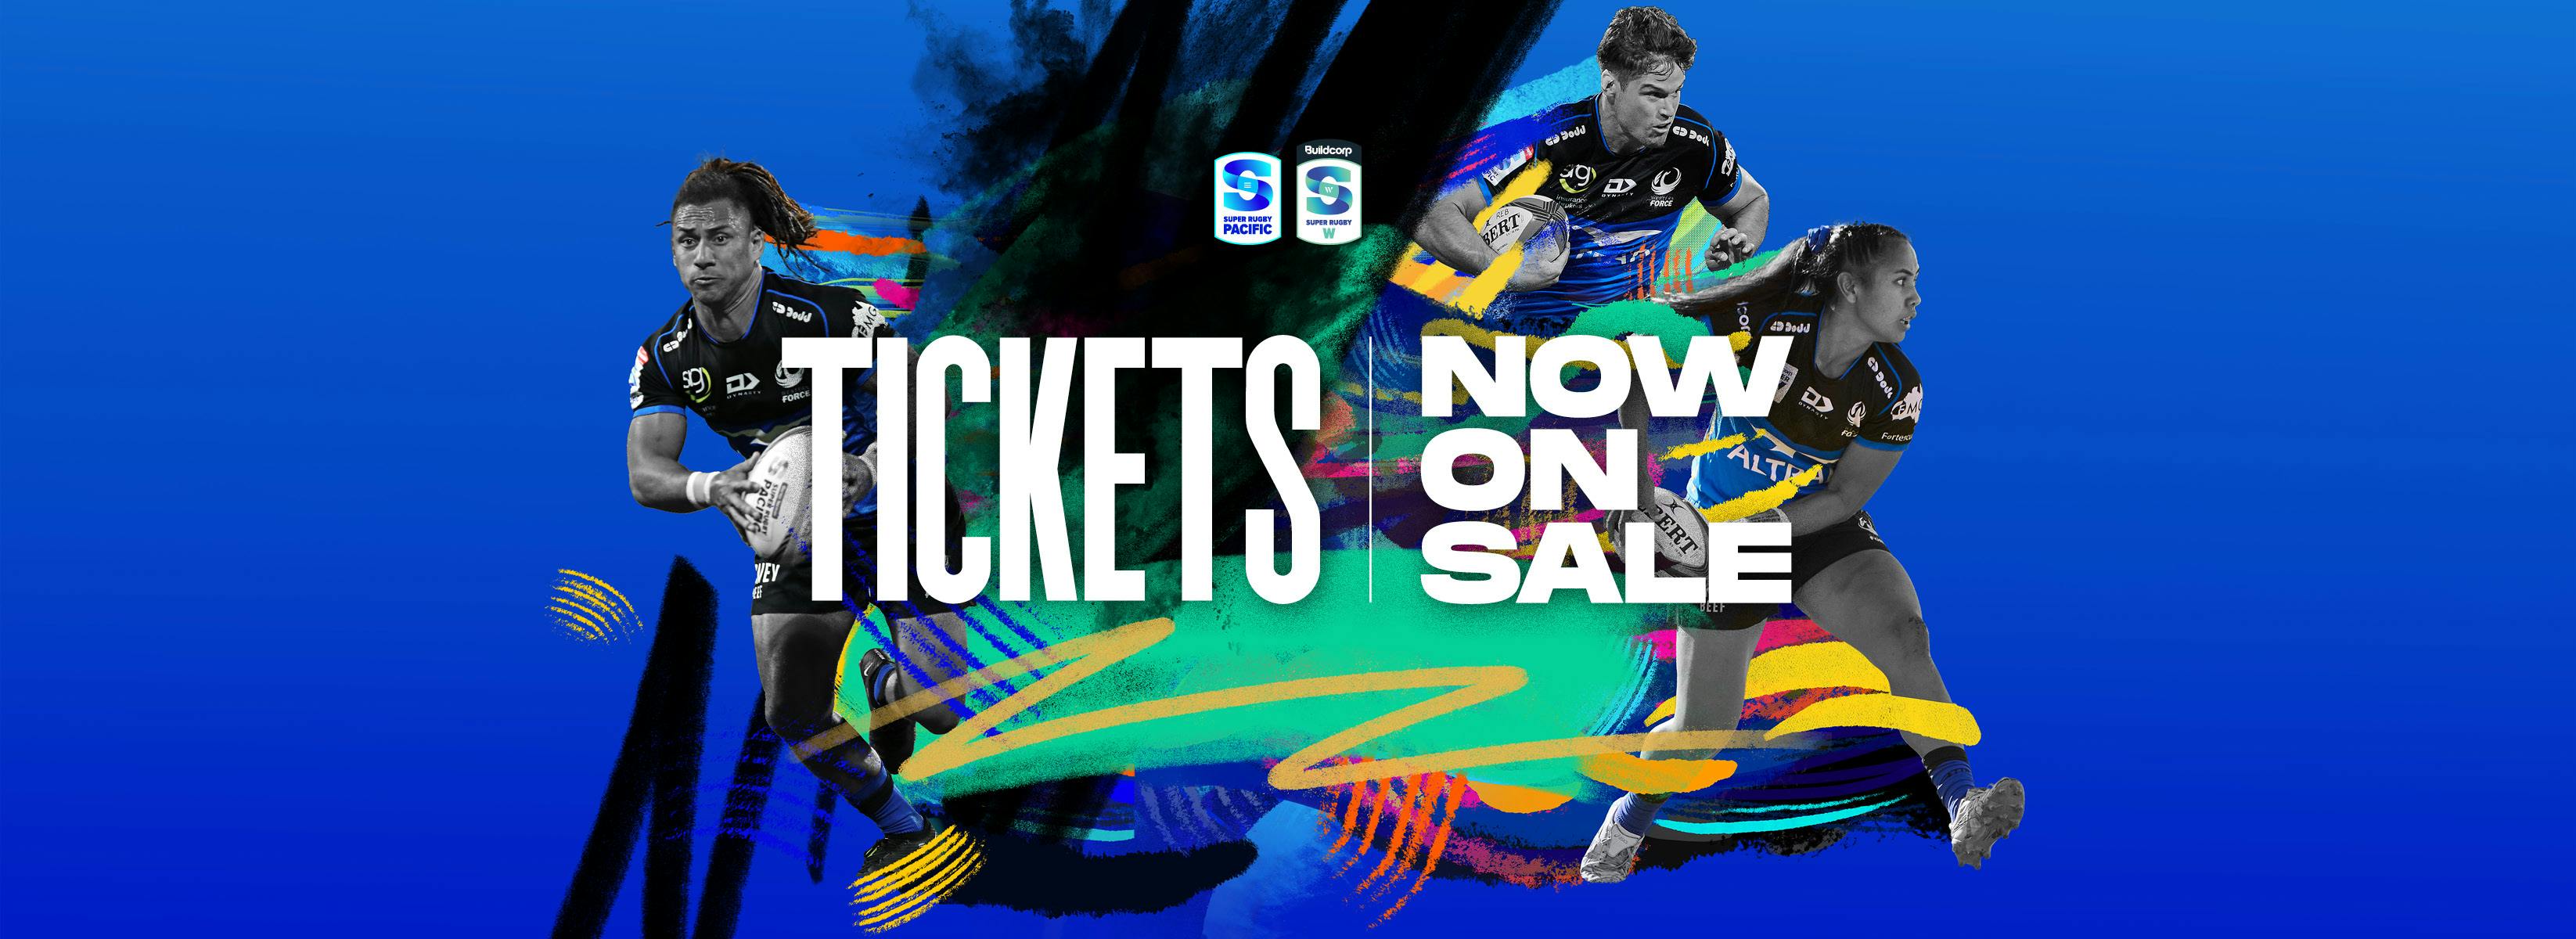 Tickets On Sale NOW_Westernforce